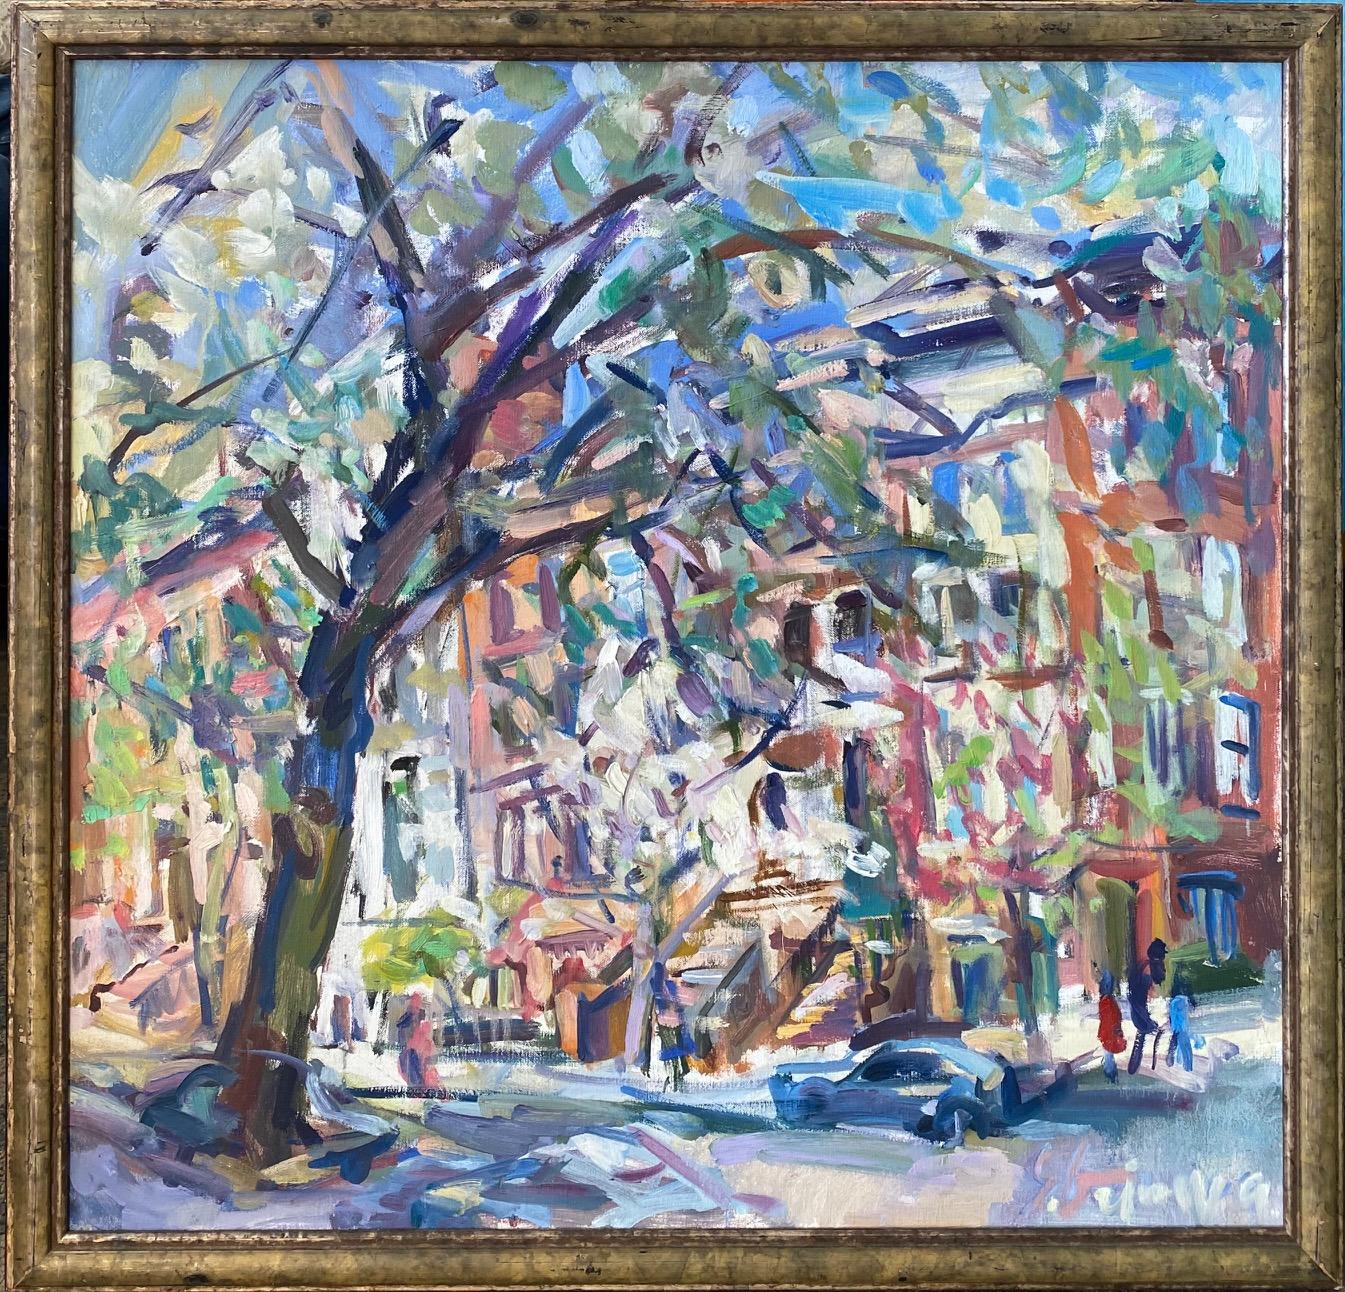 Sonia Grineva Landscape Painting - Carnegie Hill, original 28x29 abstract expressionist New York City landscape